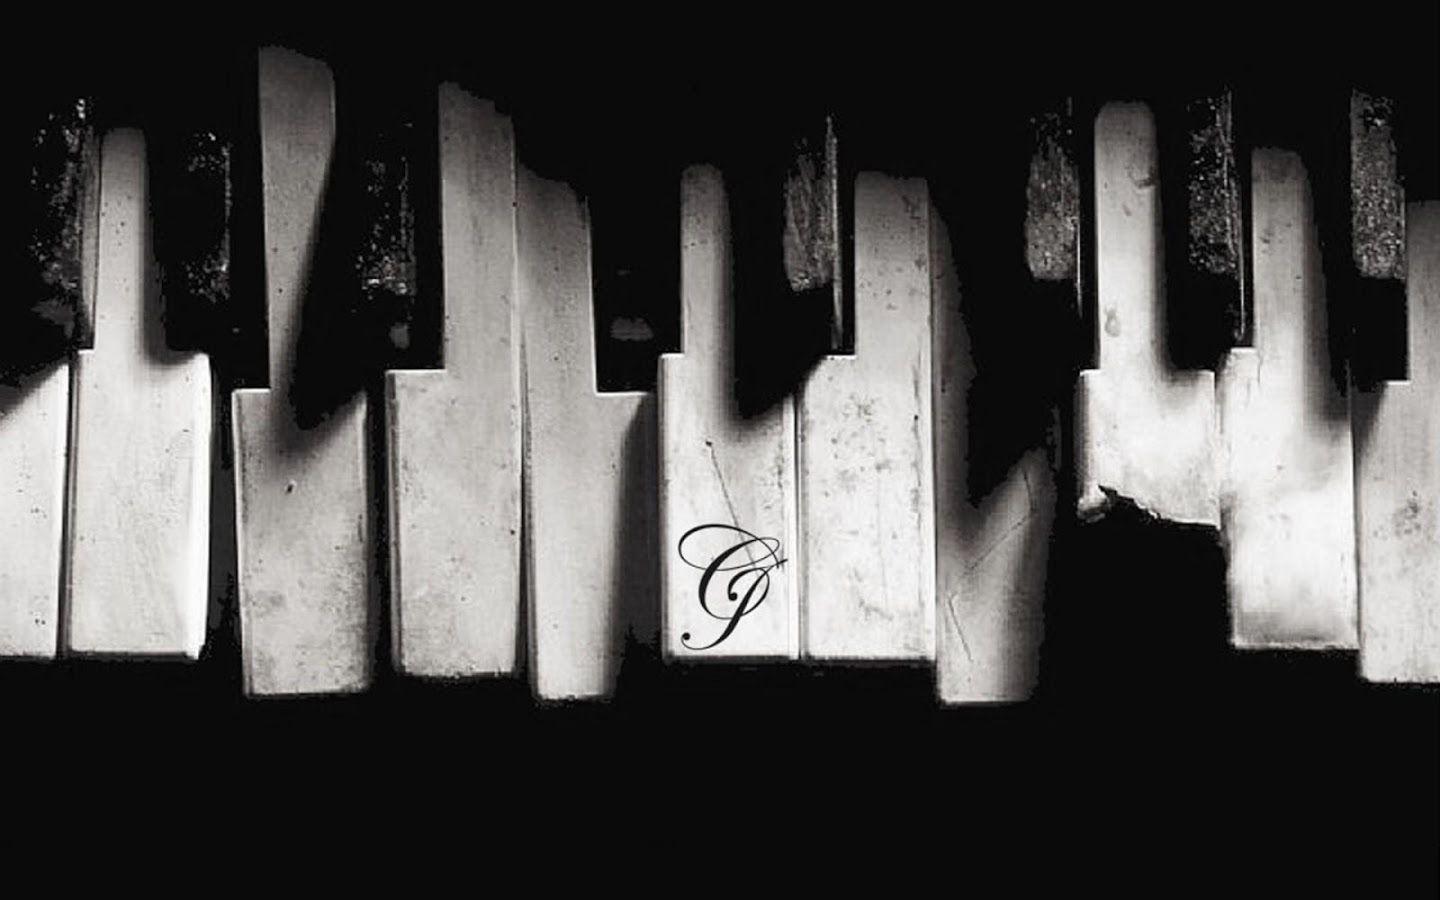 Piano Wallpaper Apps on Google Play